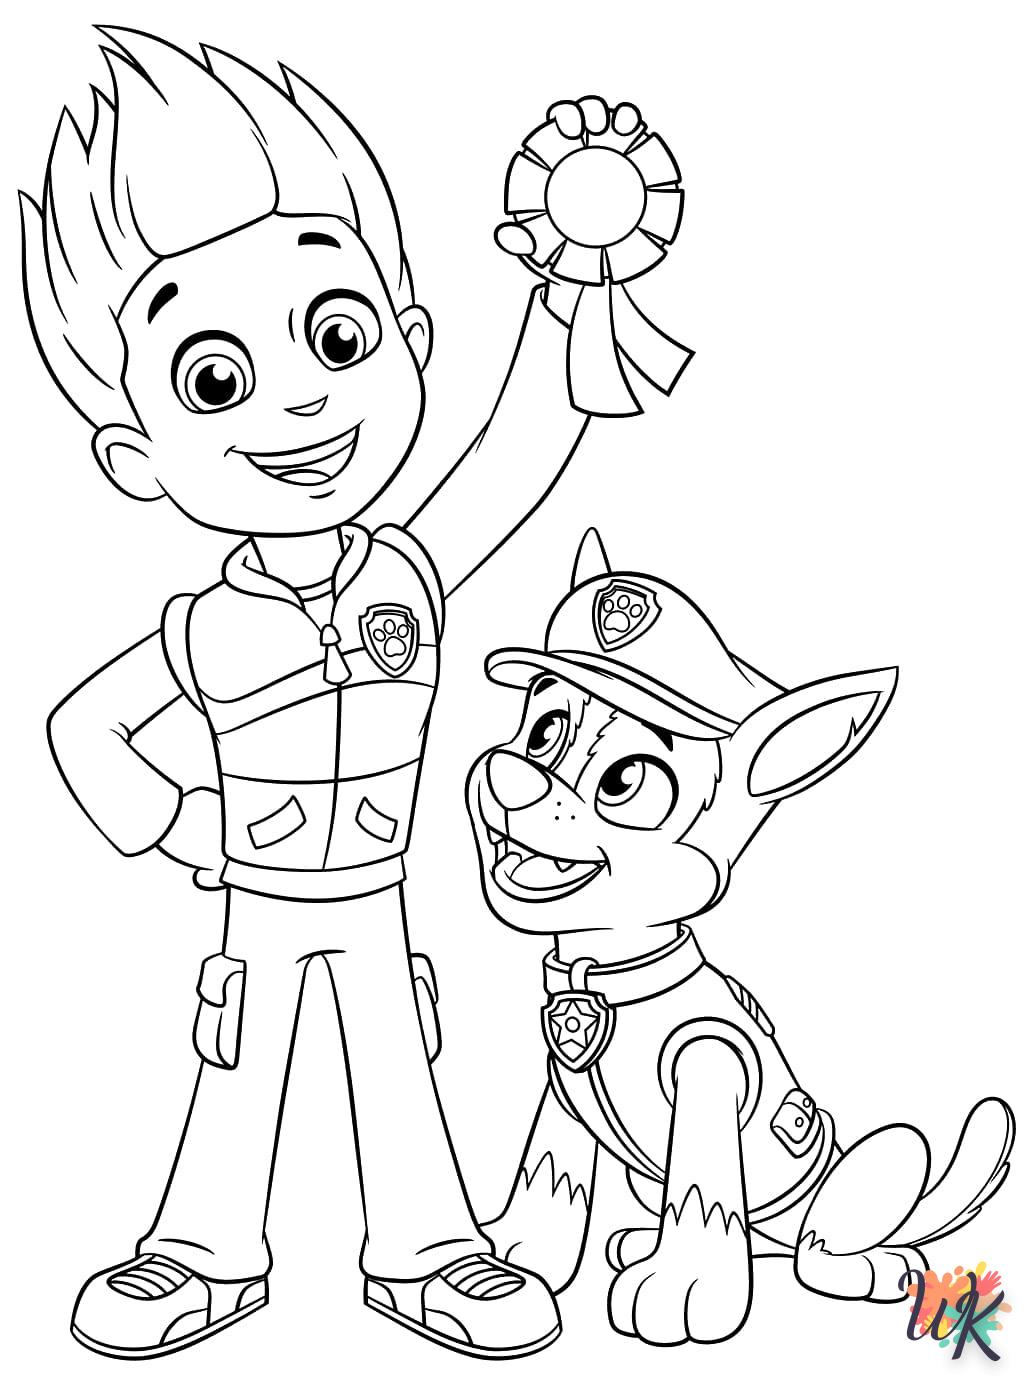 Paw Patrol coloring page to print for 9 year olds